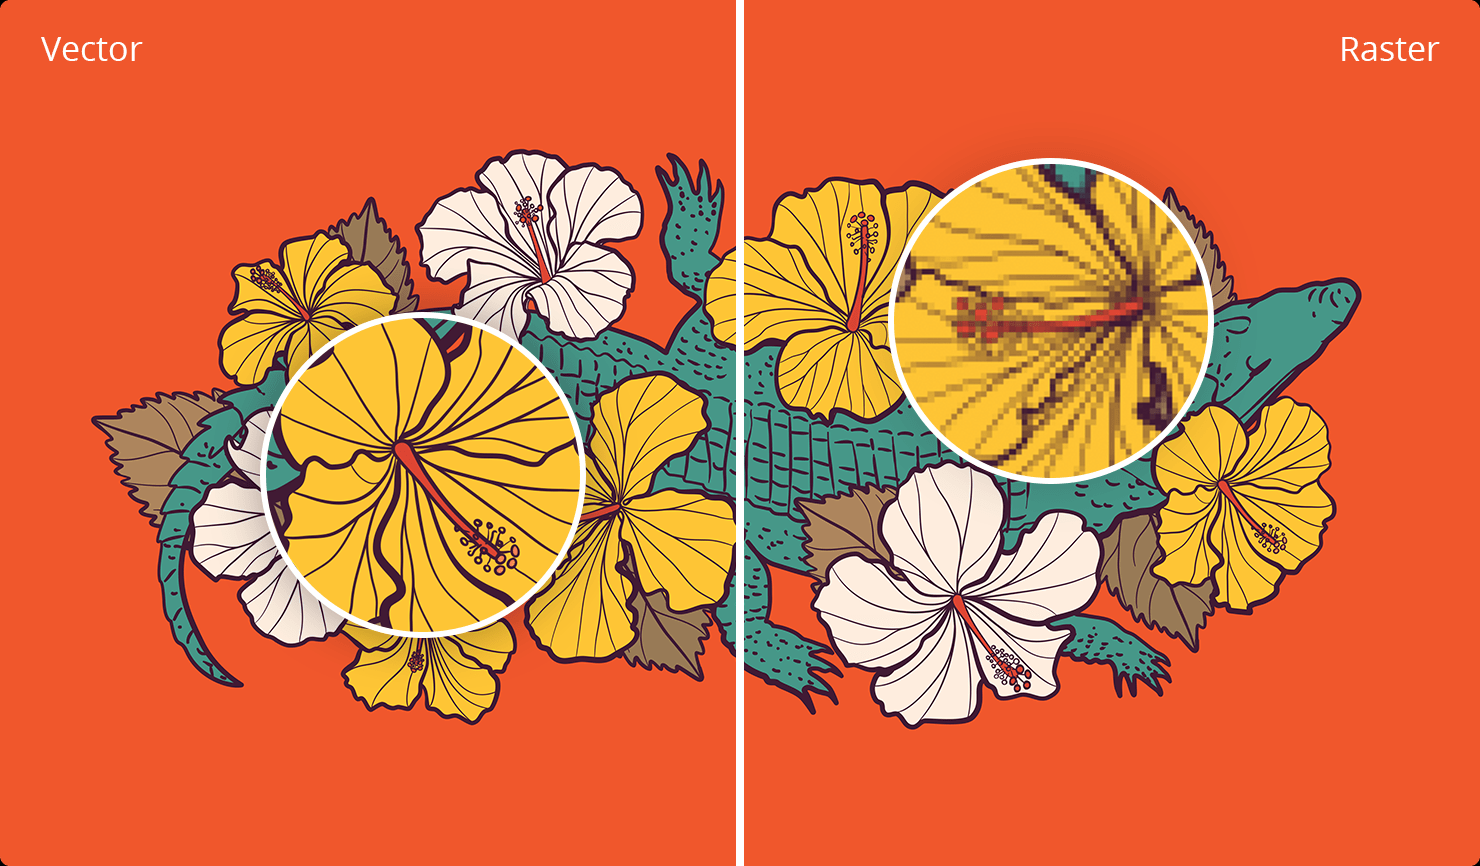 Vector flowers on an orange background